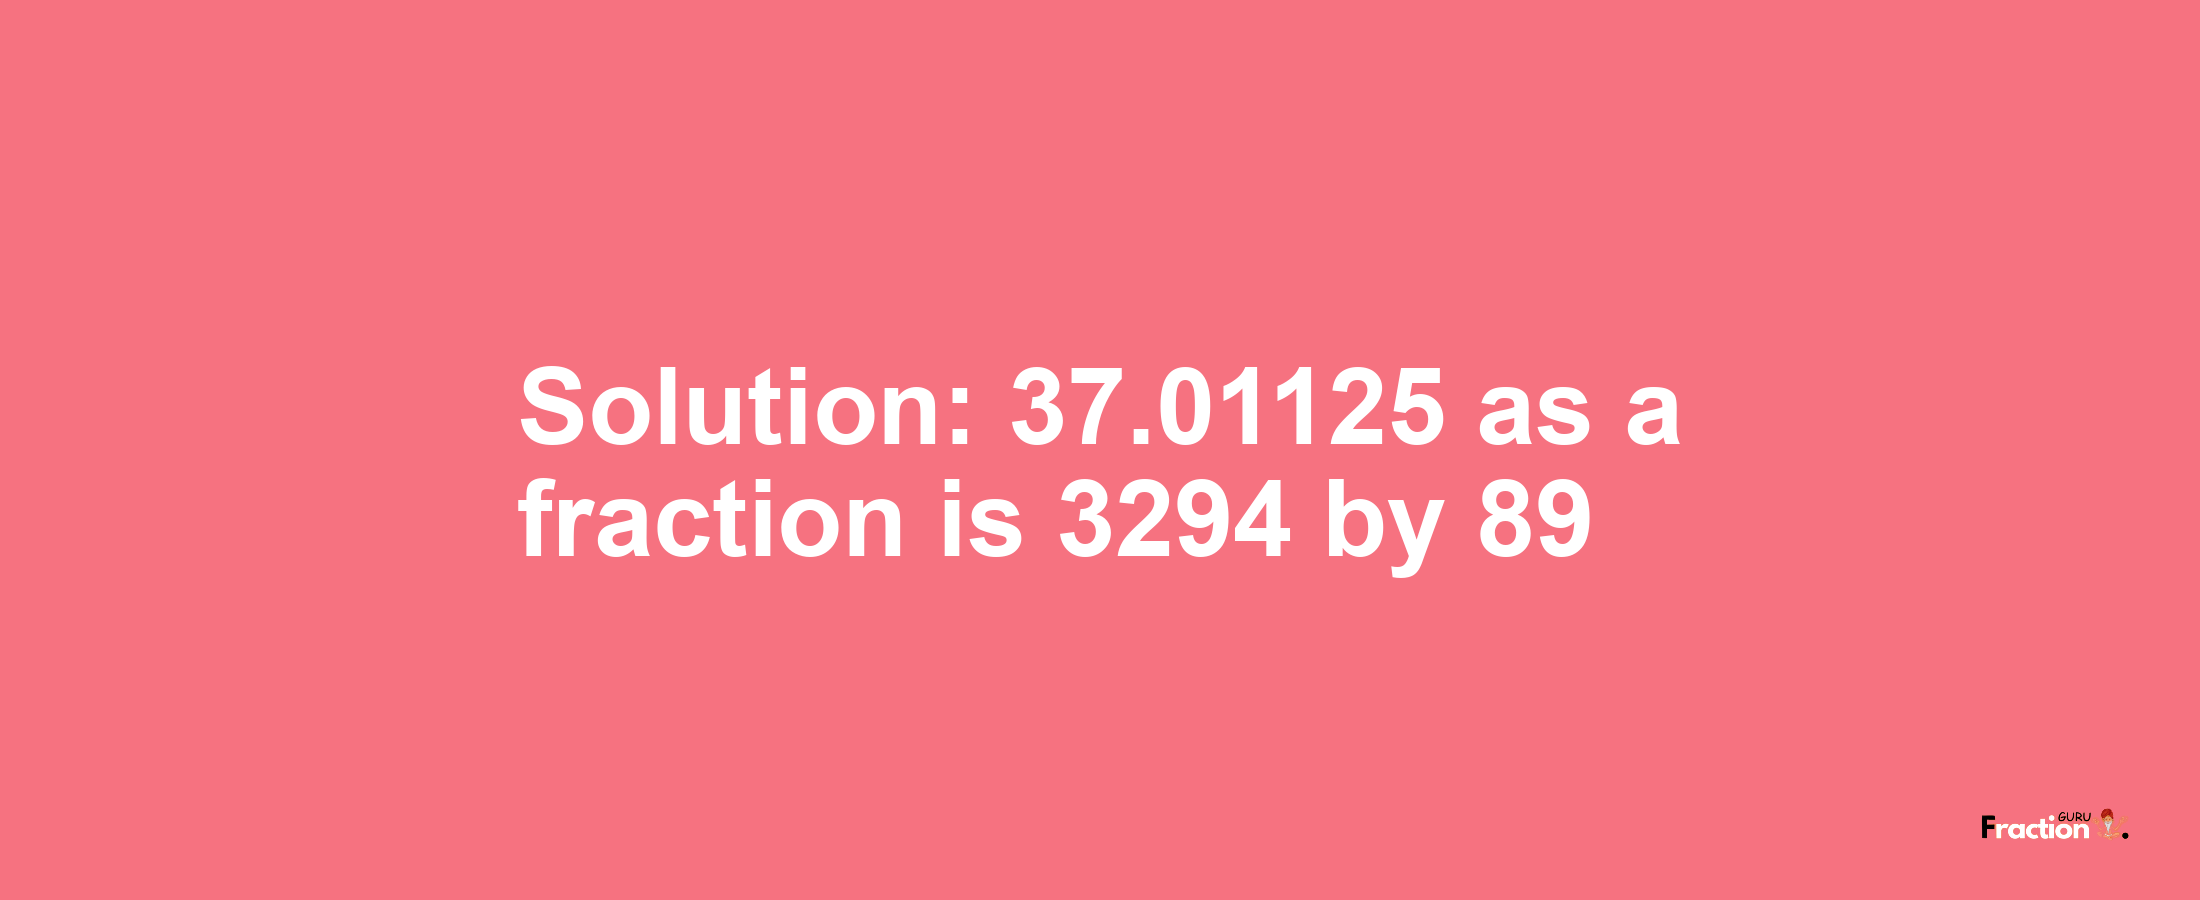 Solution:37.01125 as a fraction is 3294/89